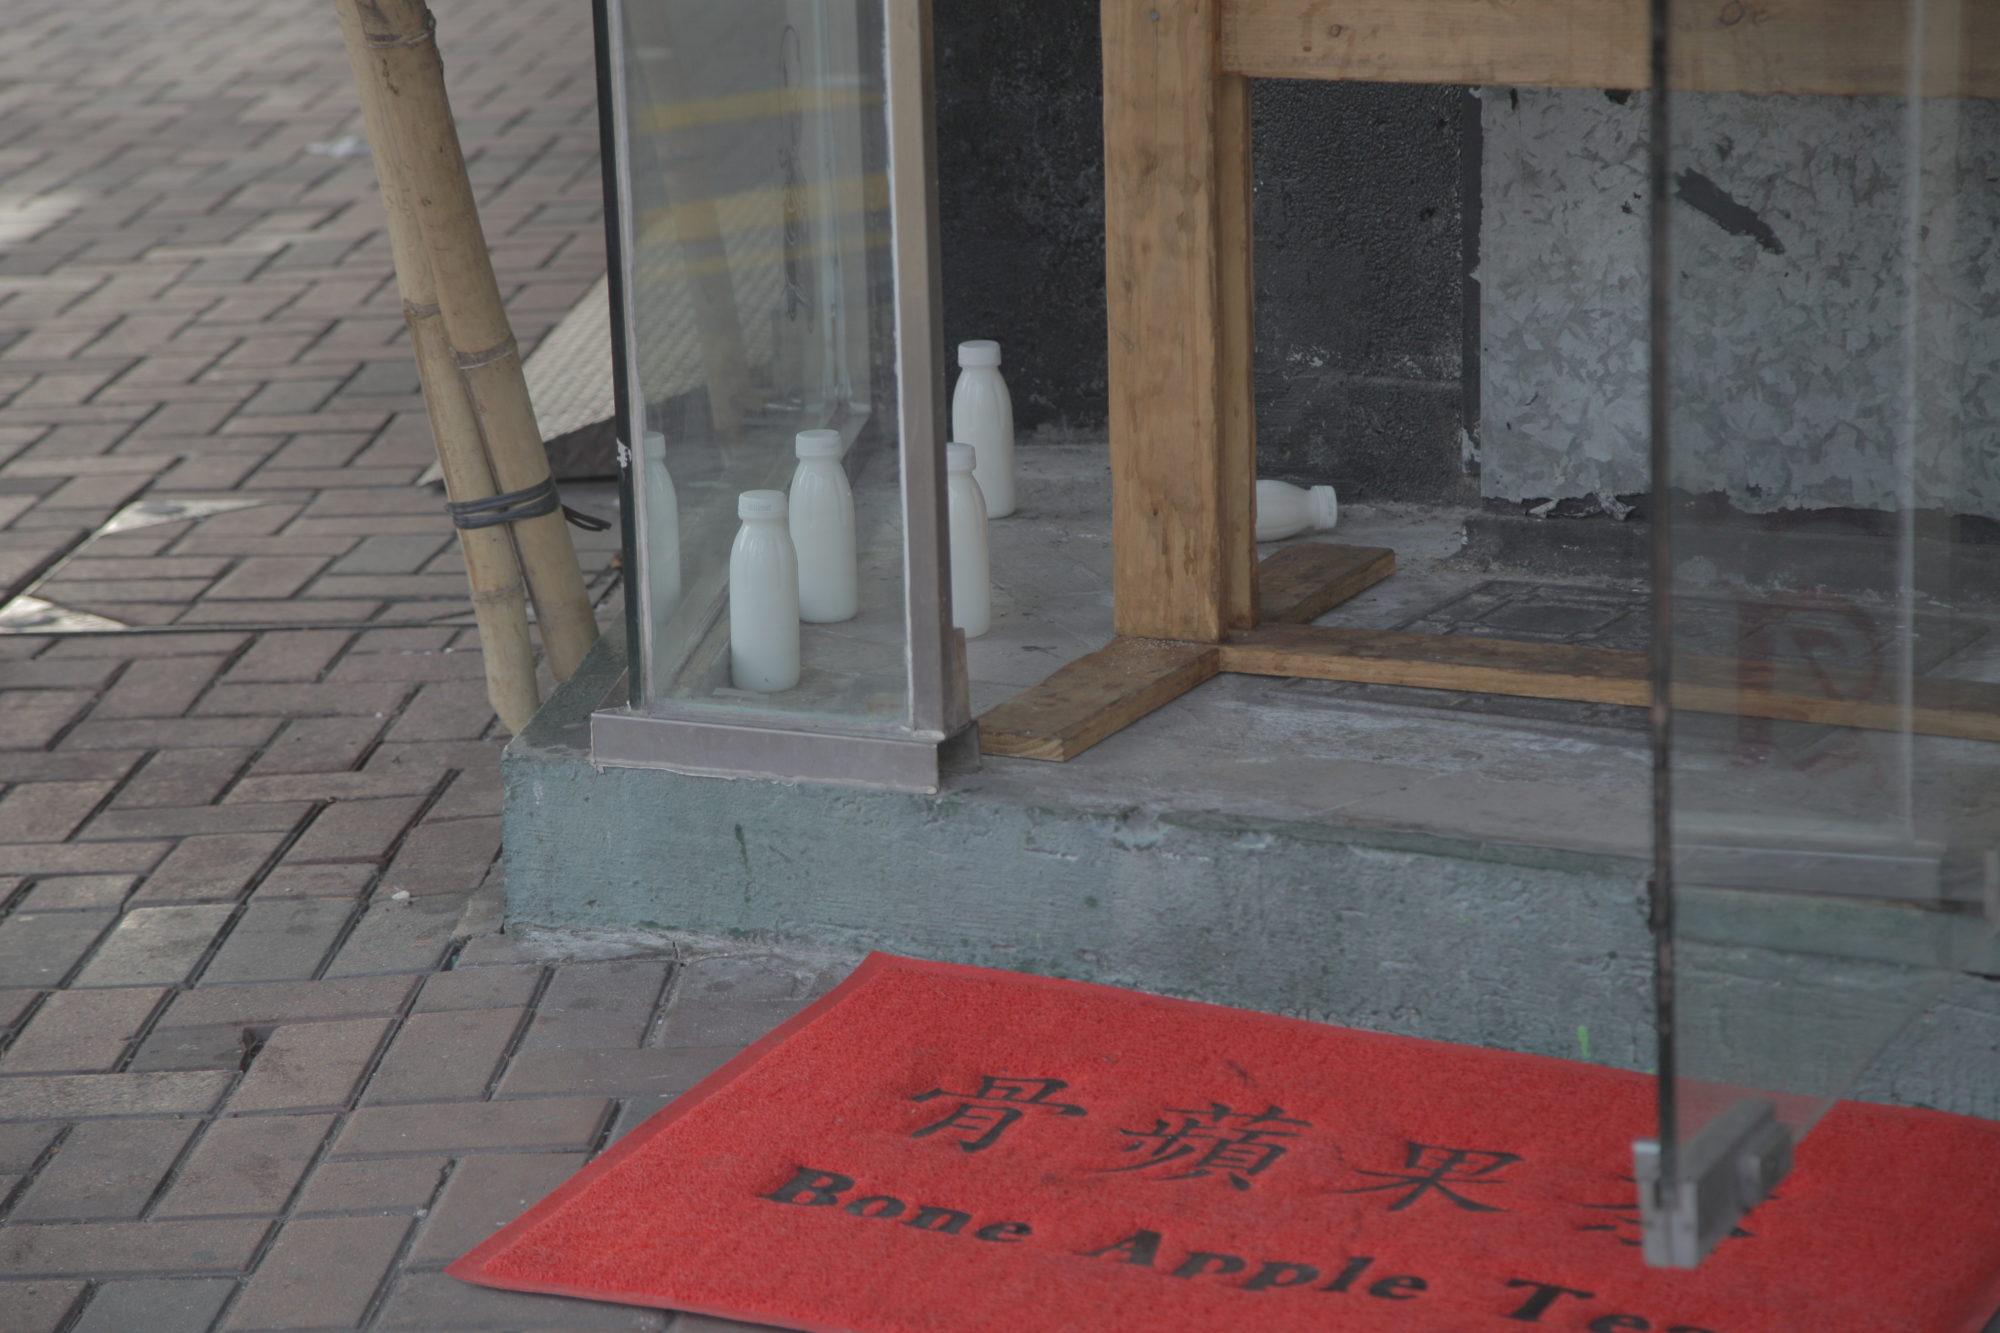 red doormat on brick sidewalk infant of a glass interior space with milk cartons